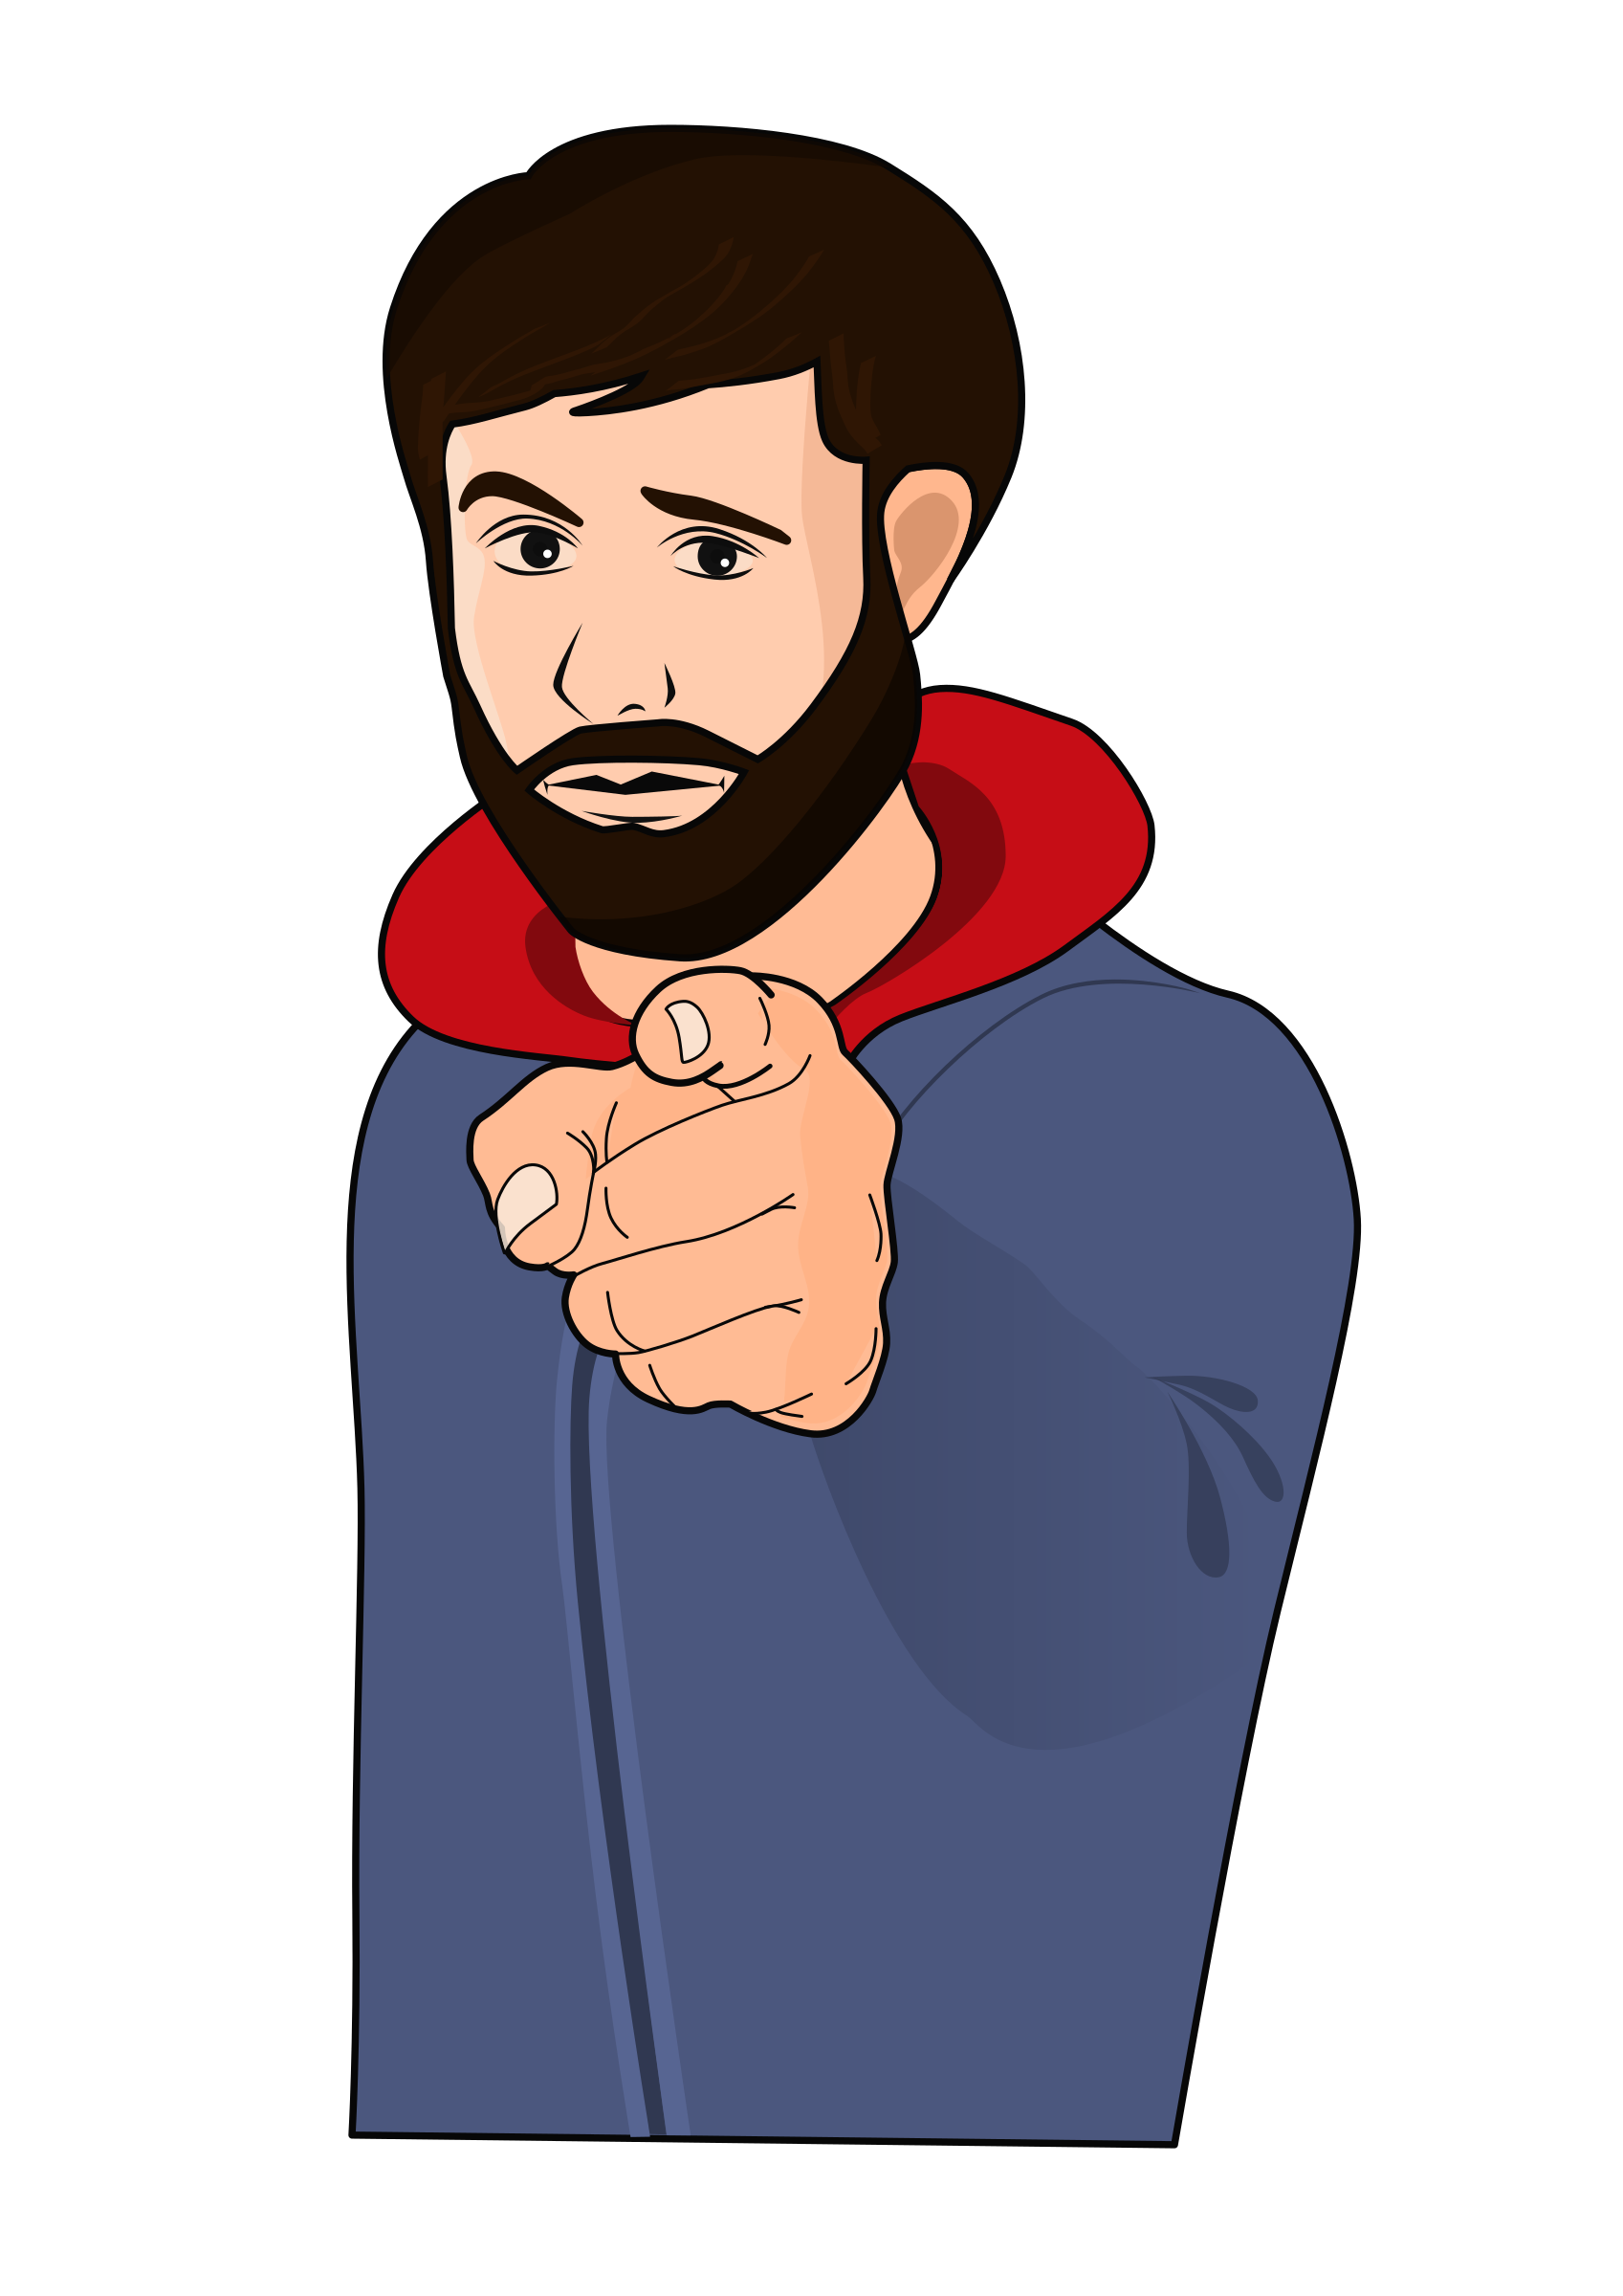 Finger Pointing At You PNG Transparent Finger Pointing At You.PNG